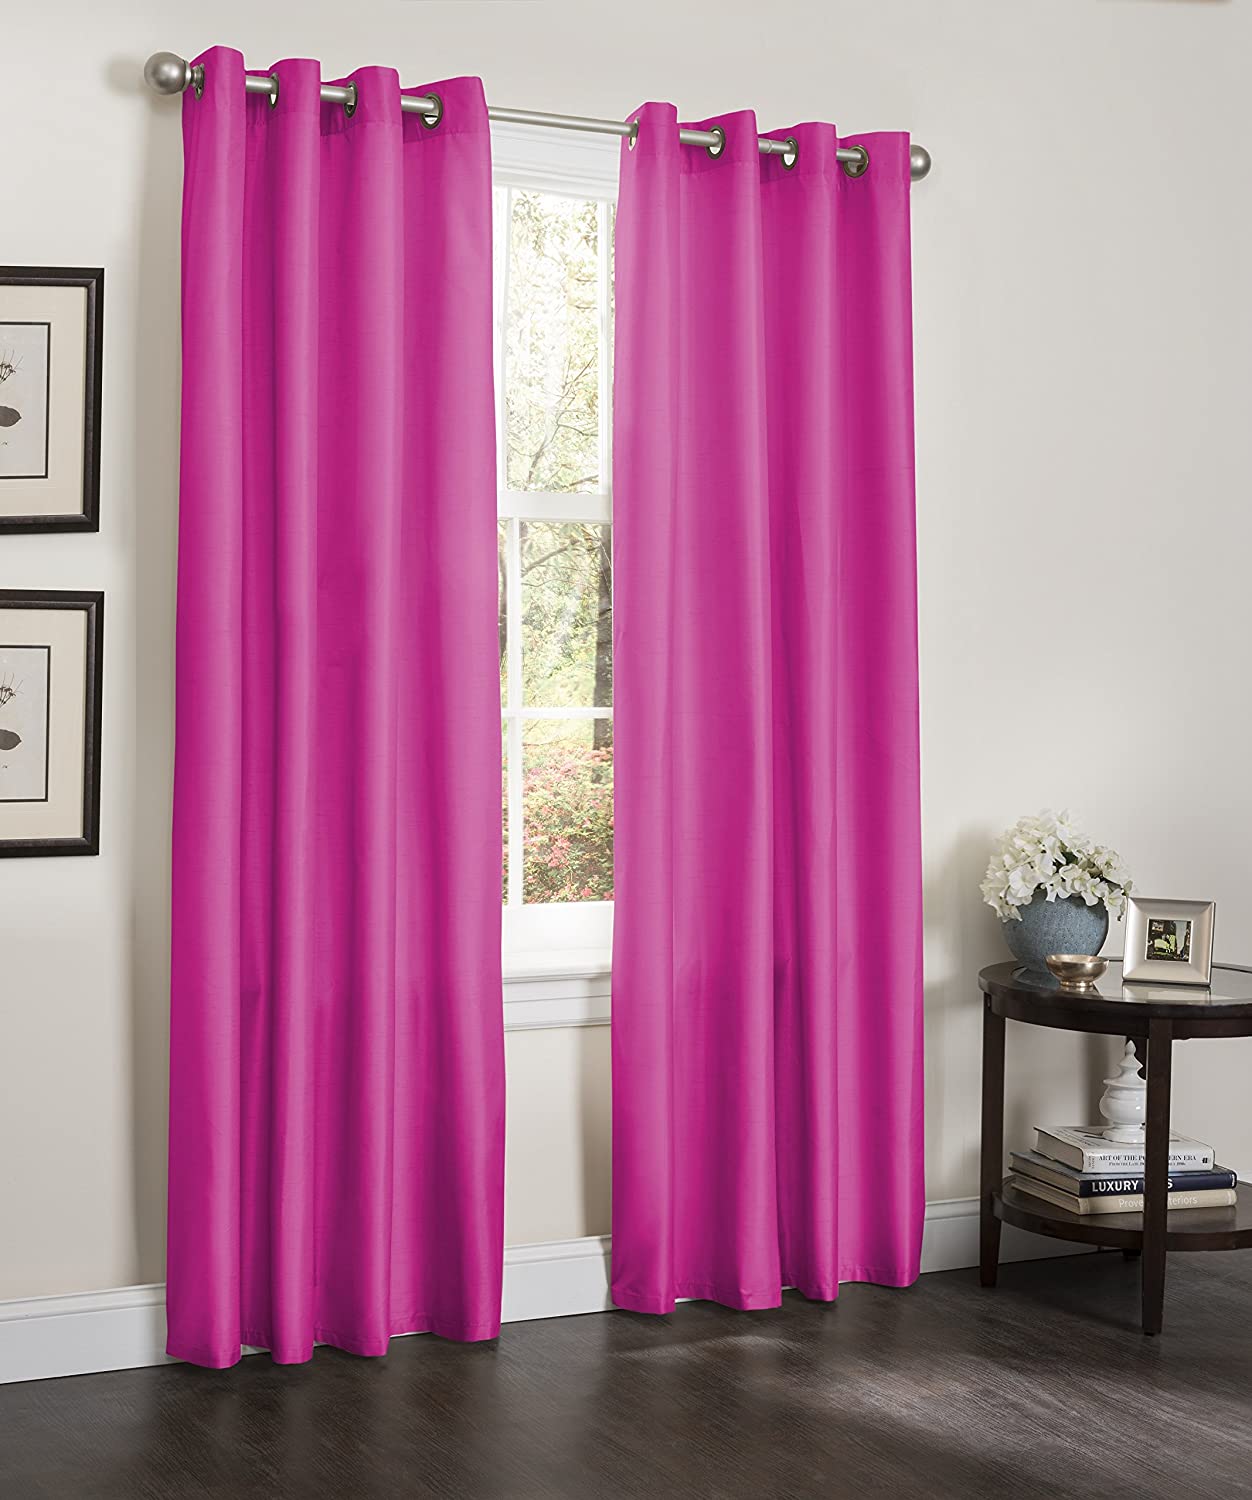 Kashi Home Erin Blackout 54 x 84 in. Single Curtain Panel - Linen Universe Co.